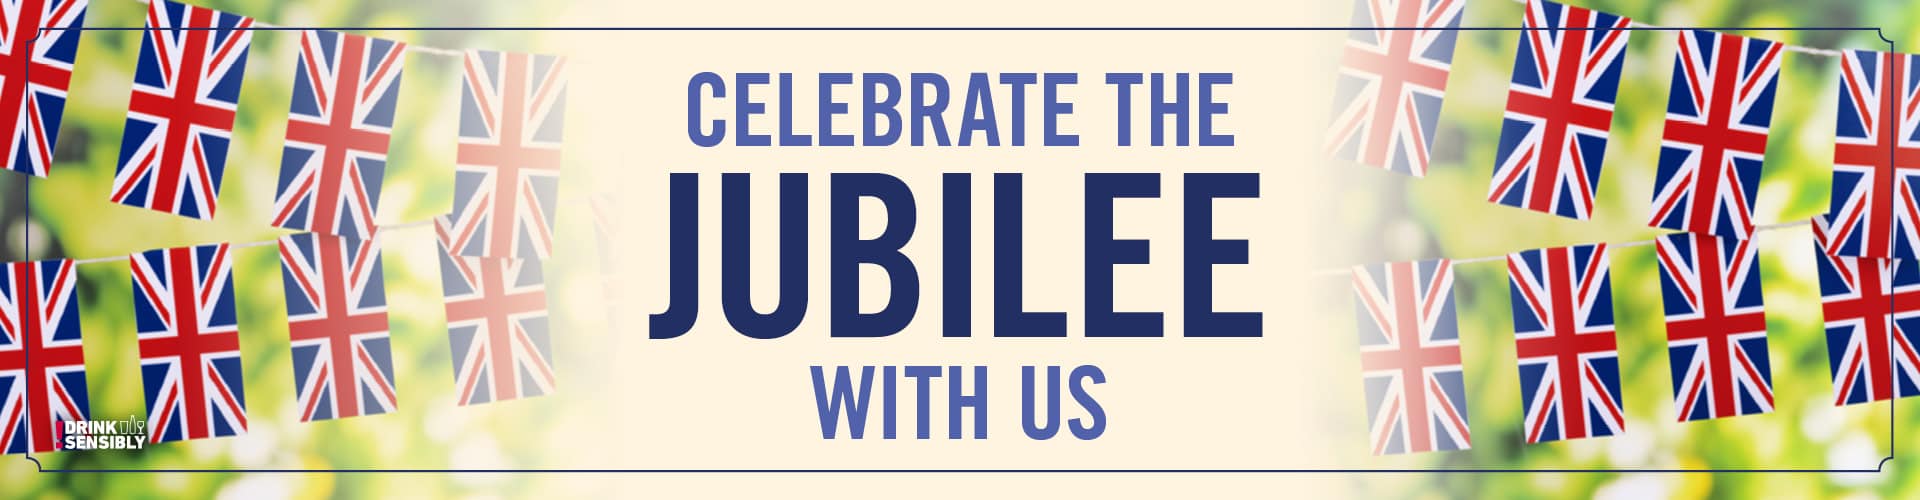 Pubs in London - The City open for Jubilee Weekend | City Taverns